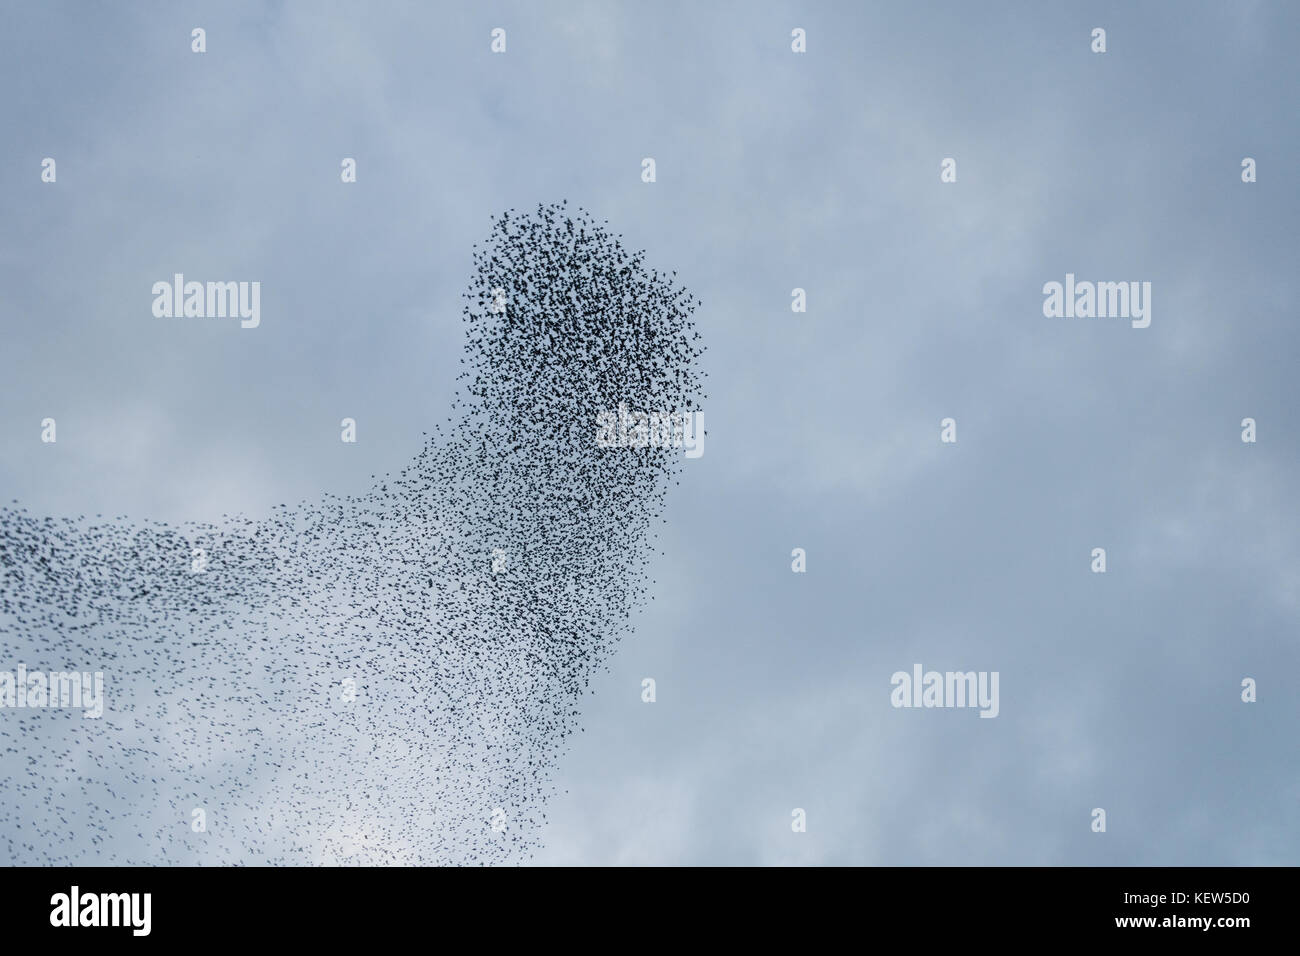 Aberystwyth, Ceredigion, UK. 23rd Oct, 2017. UK Weather. The annual winter gathering of starlings at Aberystwyth has begun, with several thousand birds converging to roost on the Royal Pier on the promenade. Credit: atgof.co/Alamy Live News Stock Photo